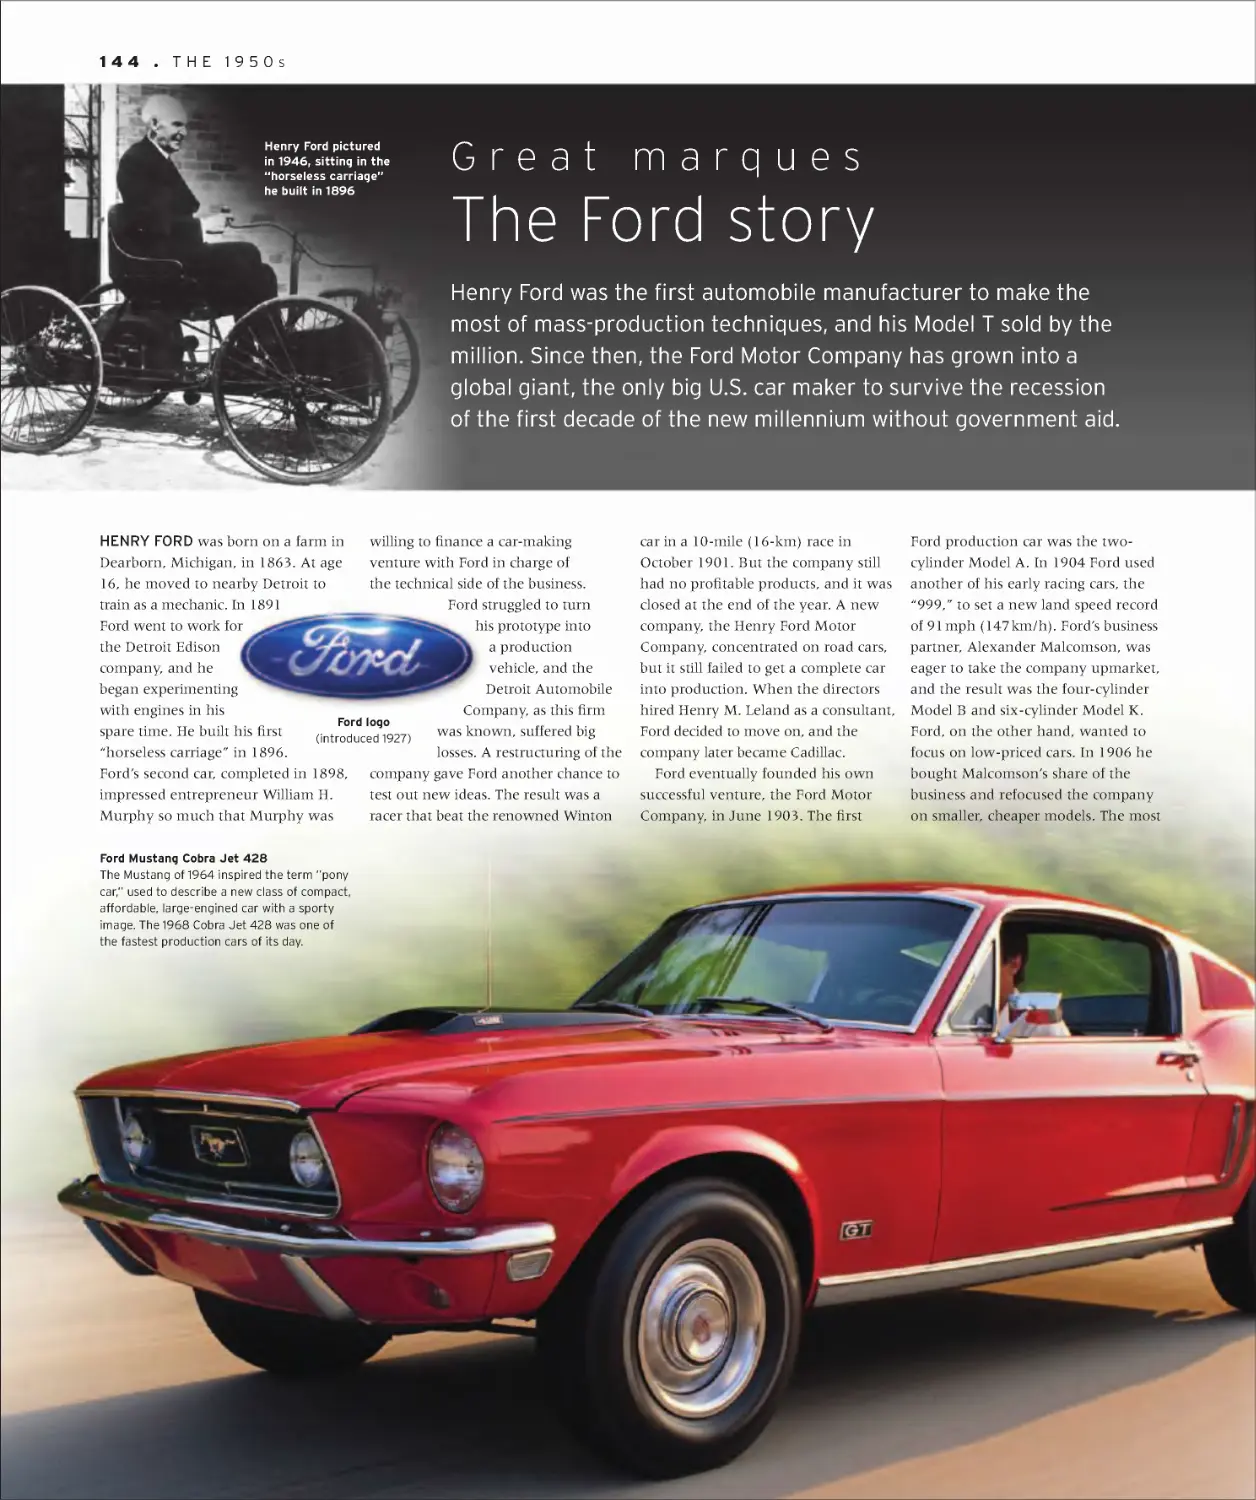 Great marques: The Ford story 144